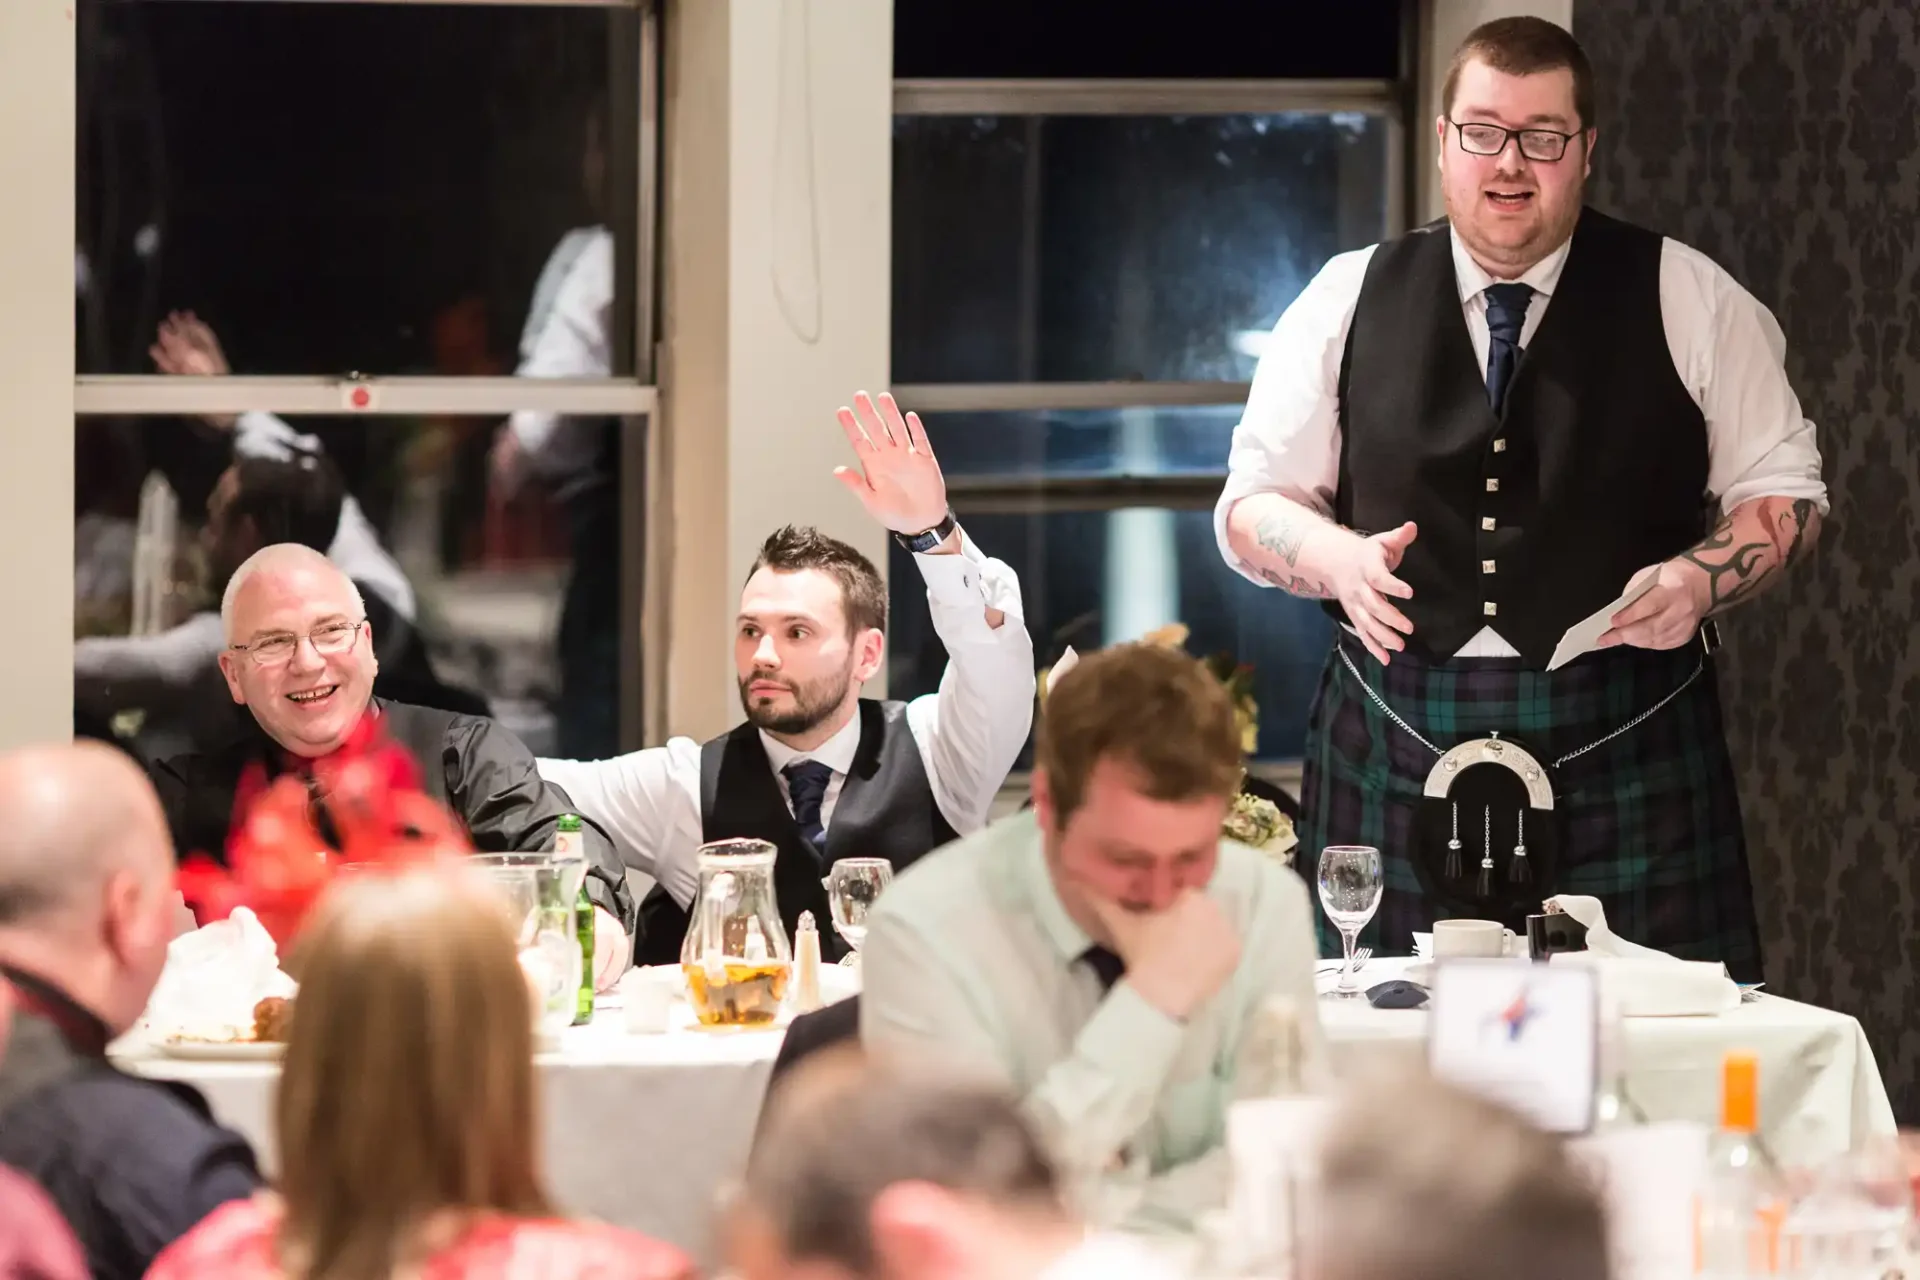 A man in a kilt speaks animatedly at a dinner event while guests around him listen and react, seated at tables adorned with festive decorations.